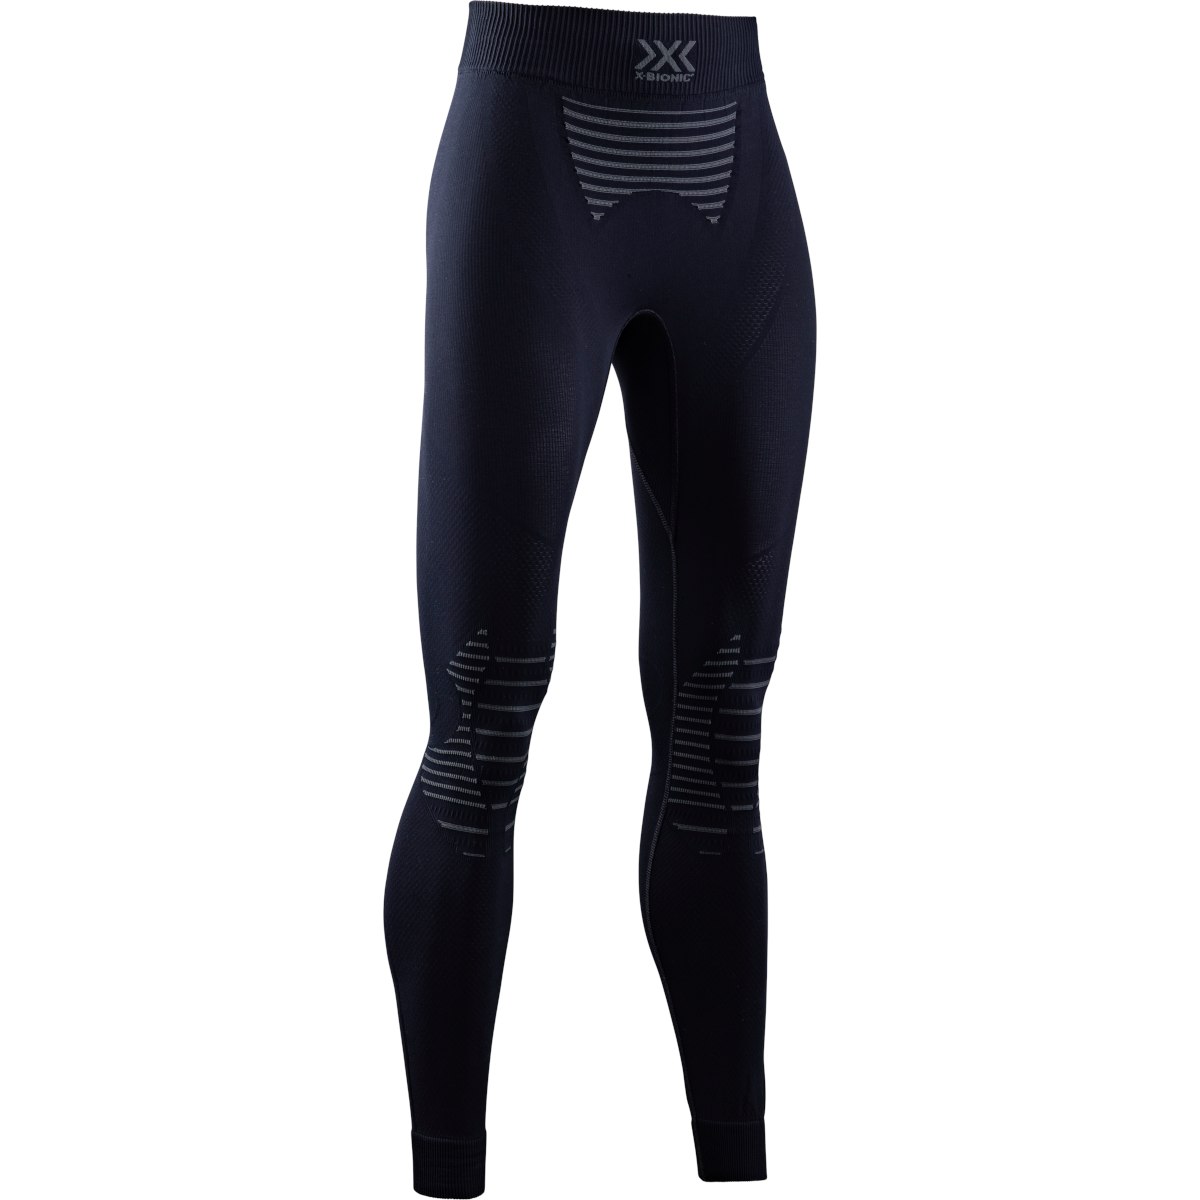 Picture of X-Bionic Invent 4.0 Pants for Women - black/charcoal